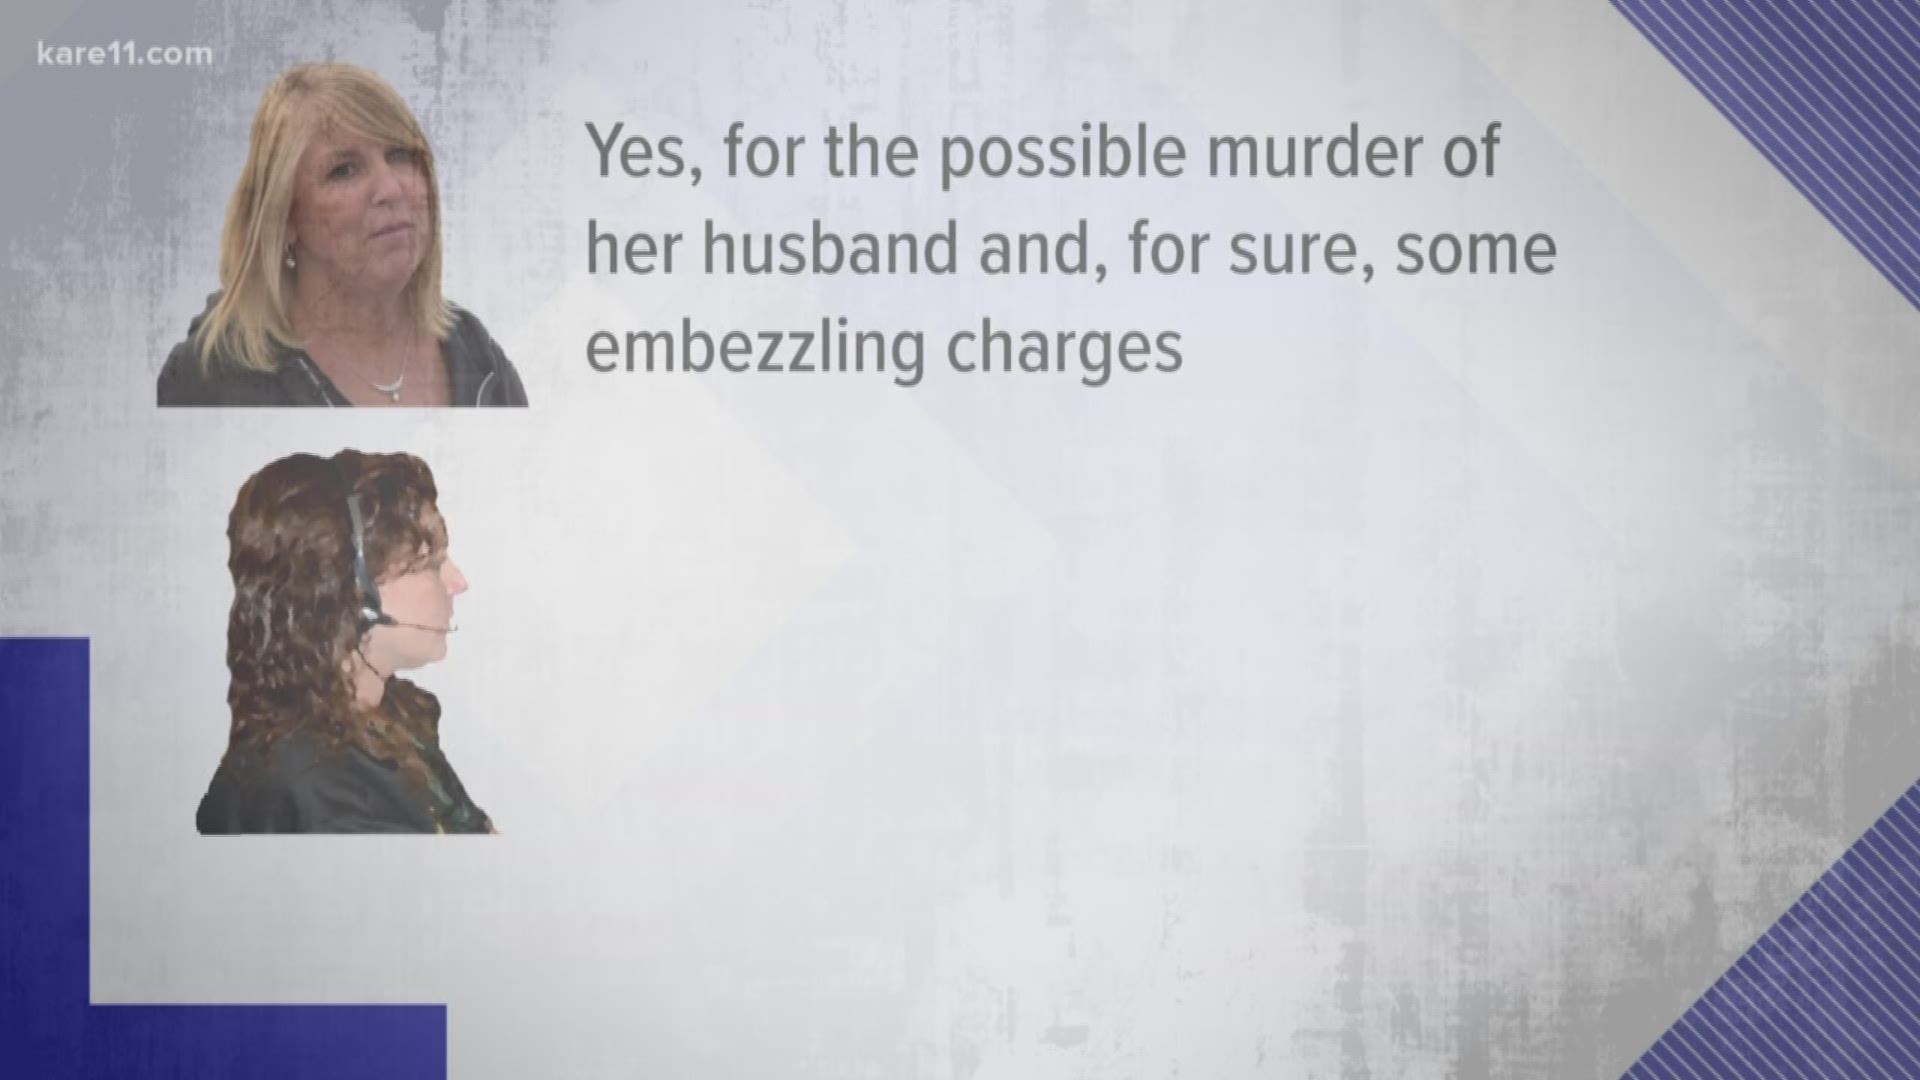 A Lee County grand jury charged Lois Riess on Wednesday with first-degree murder with a firearm, which carries a mandatory life sentence in Florida. KARE 11's Ellery McCardle has those new details: https://kare11.tv/2FxCwLn